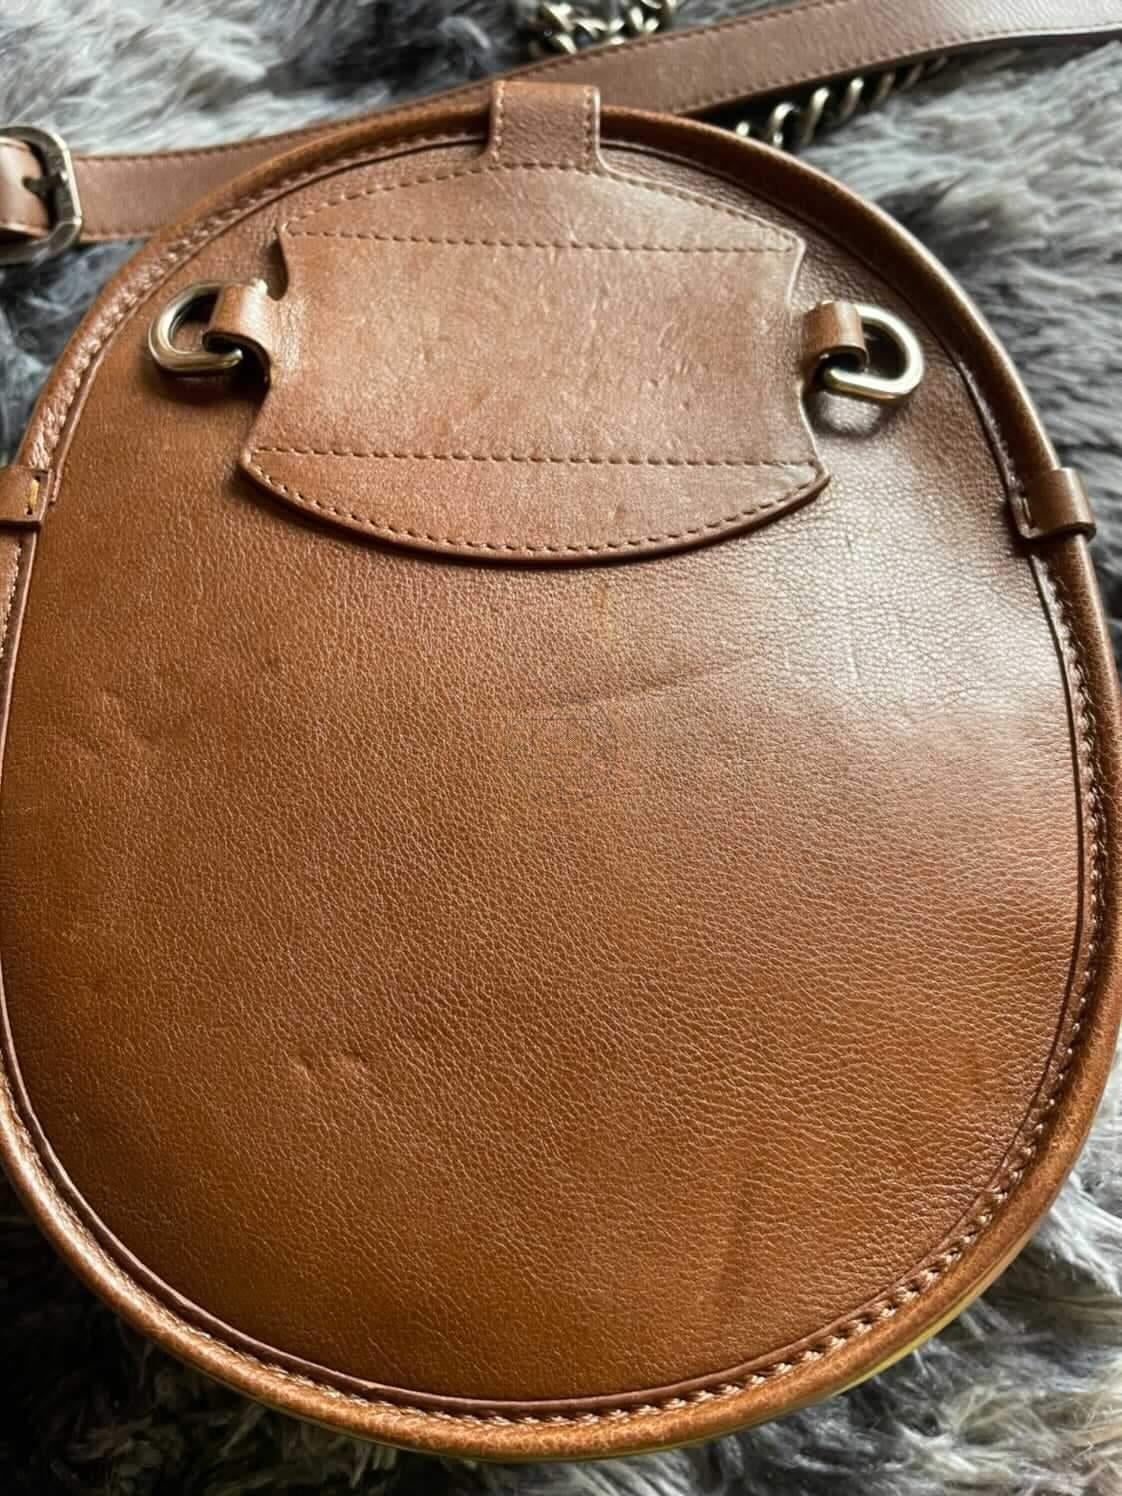 Beautiful round calfskin quilted bag with pony hair, chain and tassel detailed bag from pre-fall 2013 collection. Comes in classic camel brown color. Overall in great condition, no balding on the pony hair panel that tends to happened. Light dents